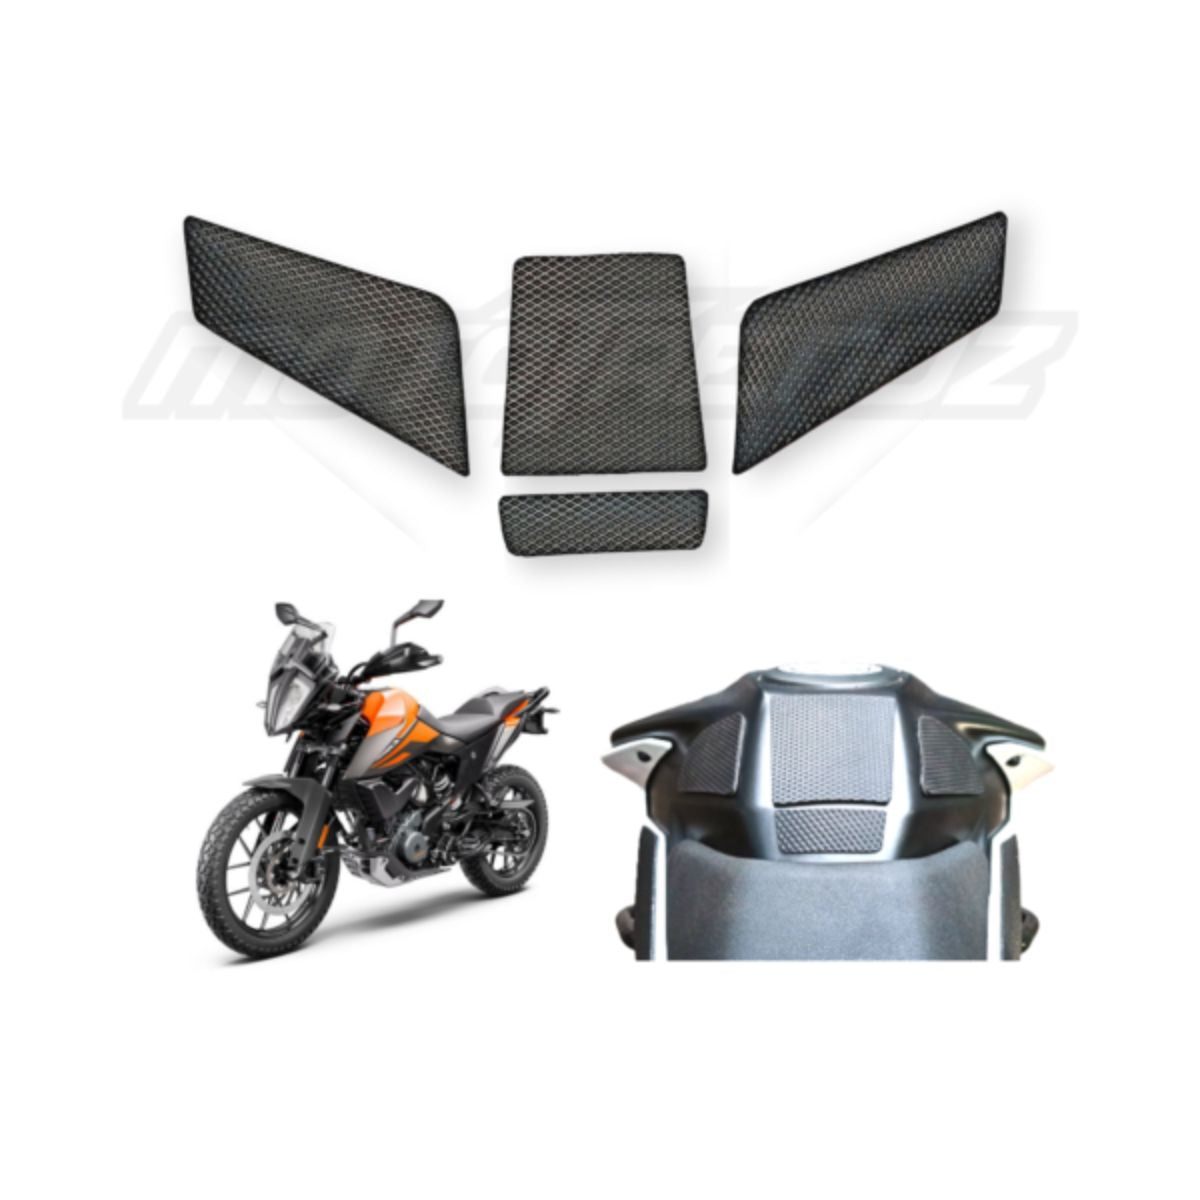 Traction Pads for KTM Adventure 250/390 2